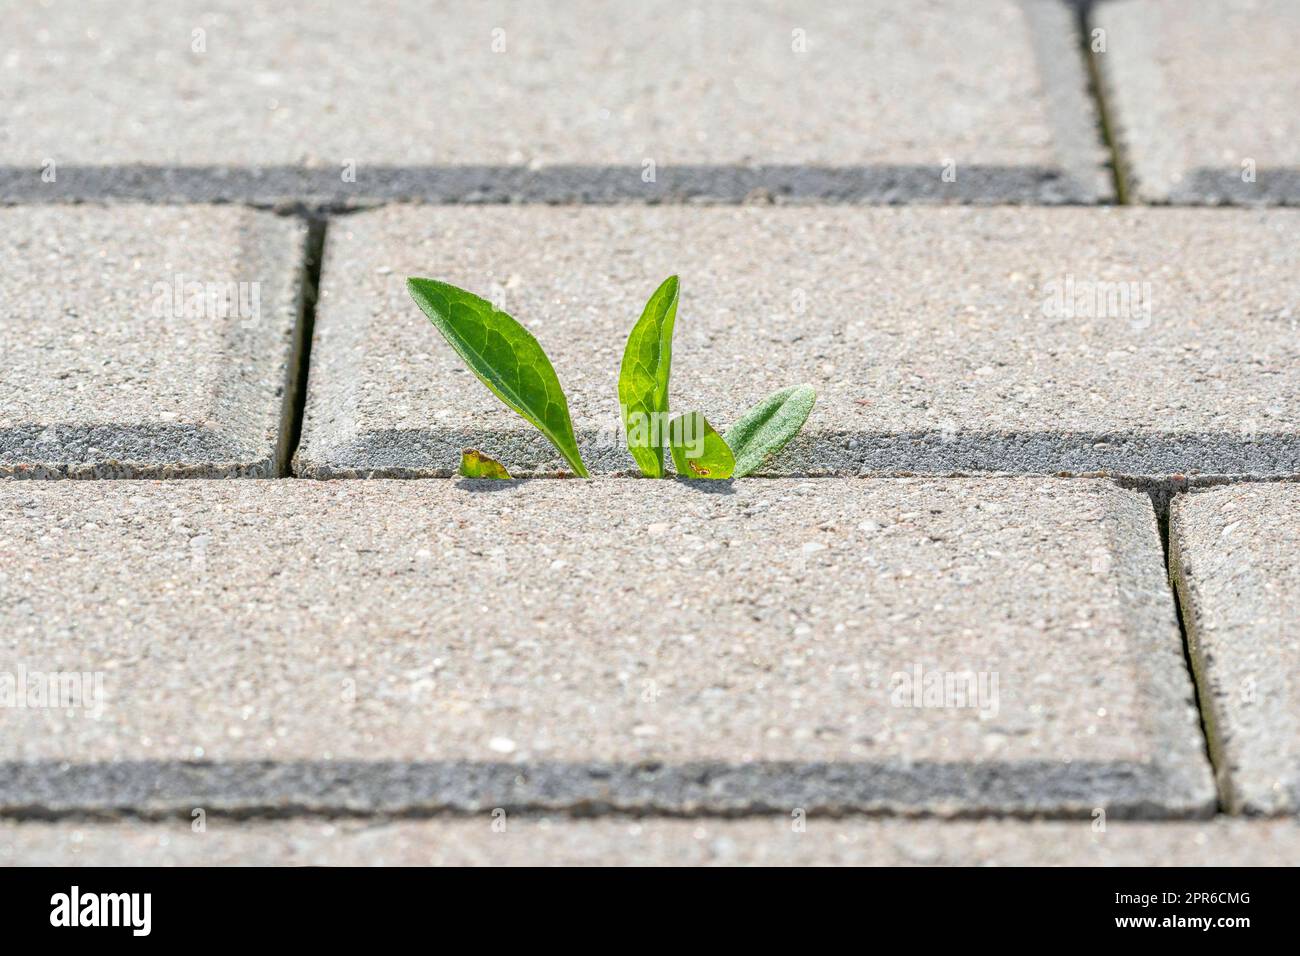 Germinating plant in paving slabs Stock Photo